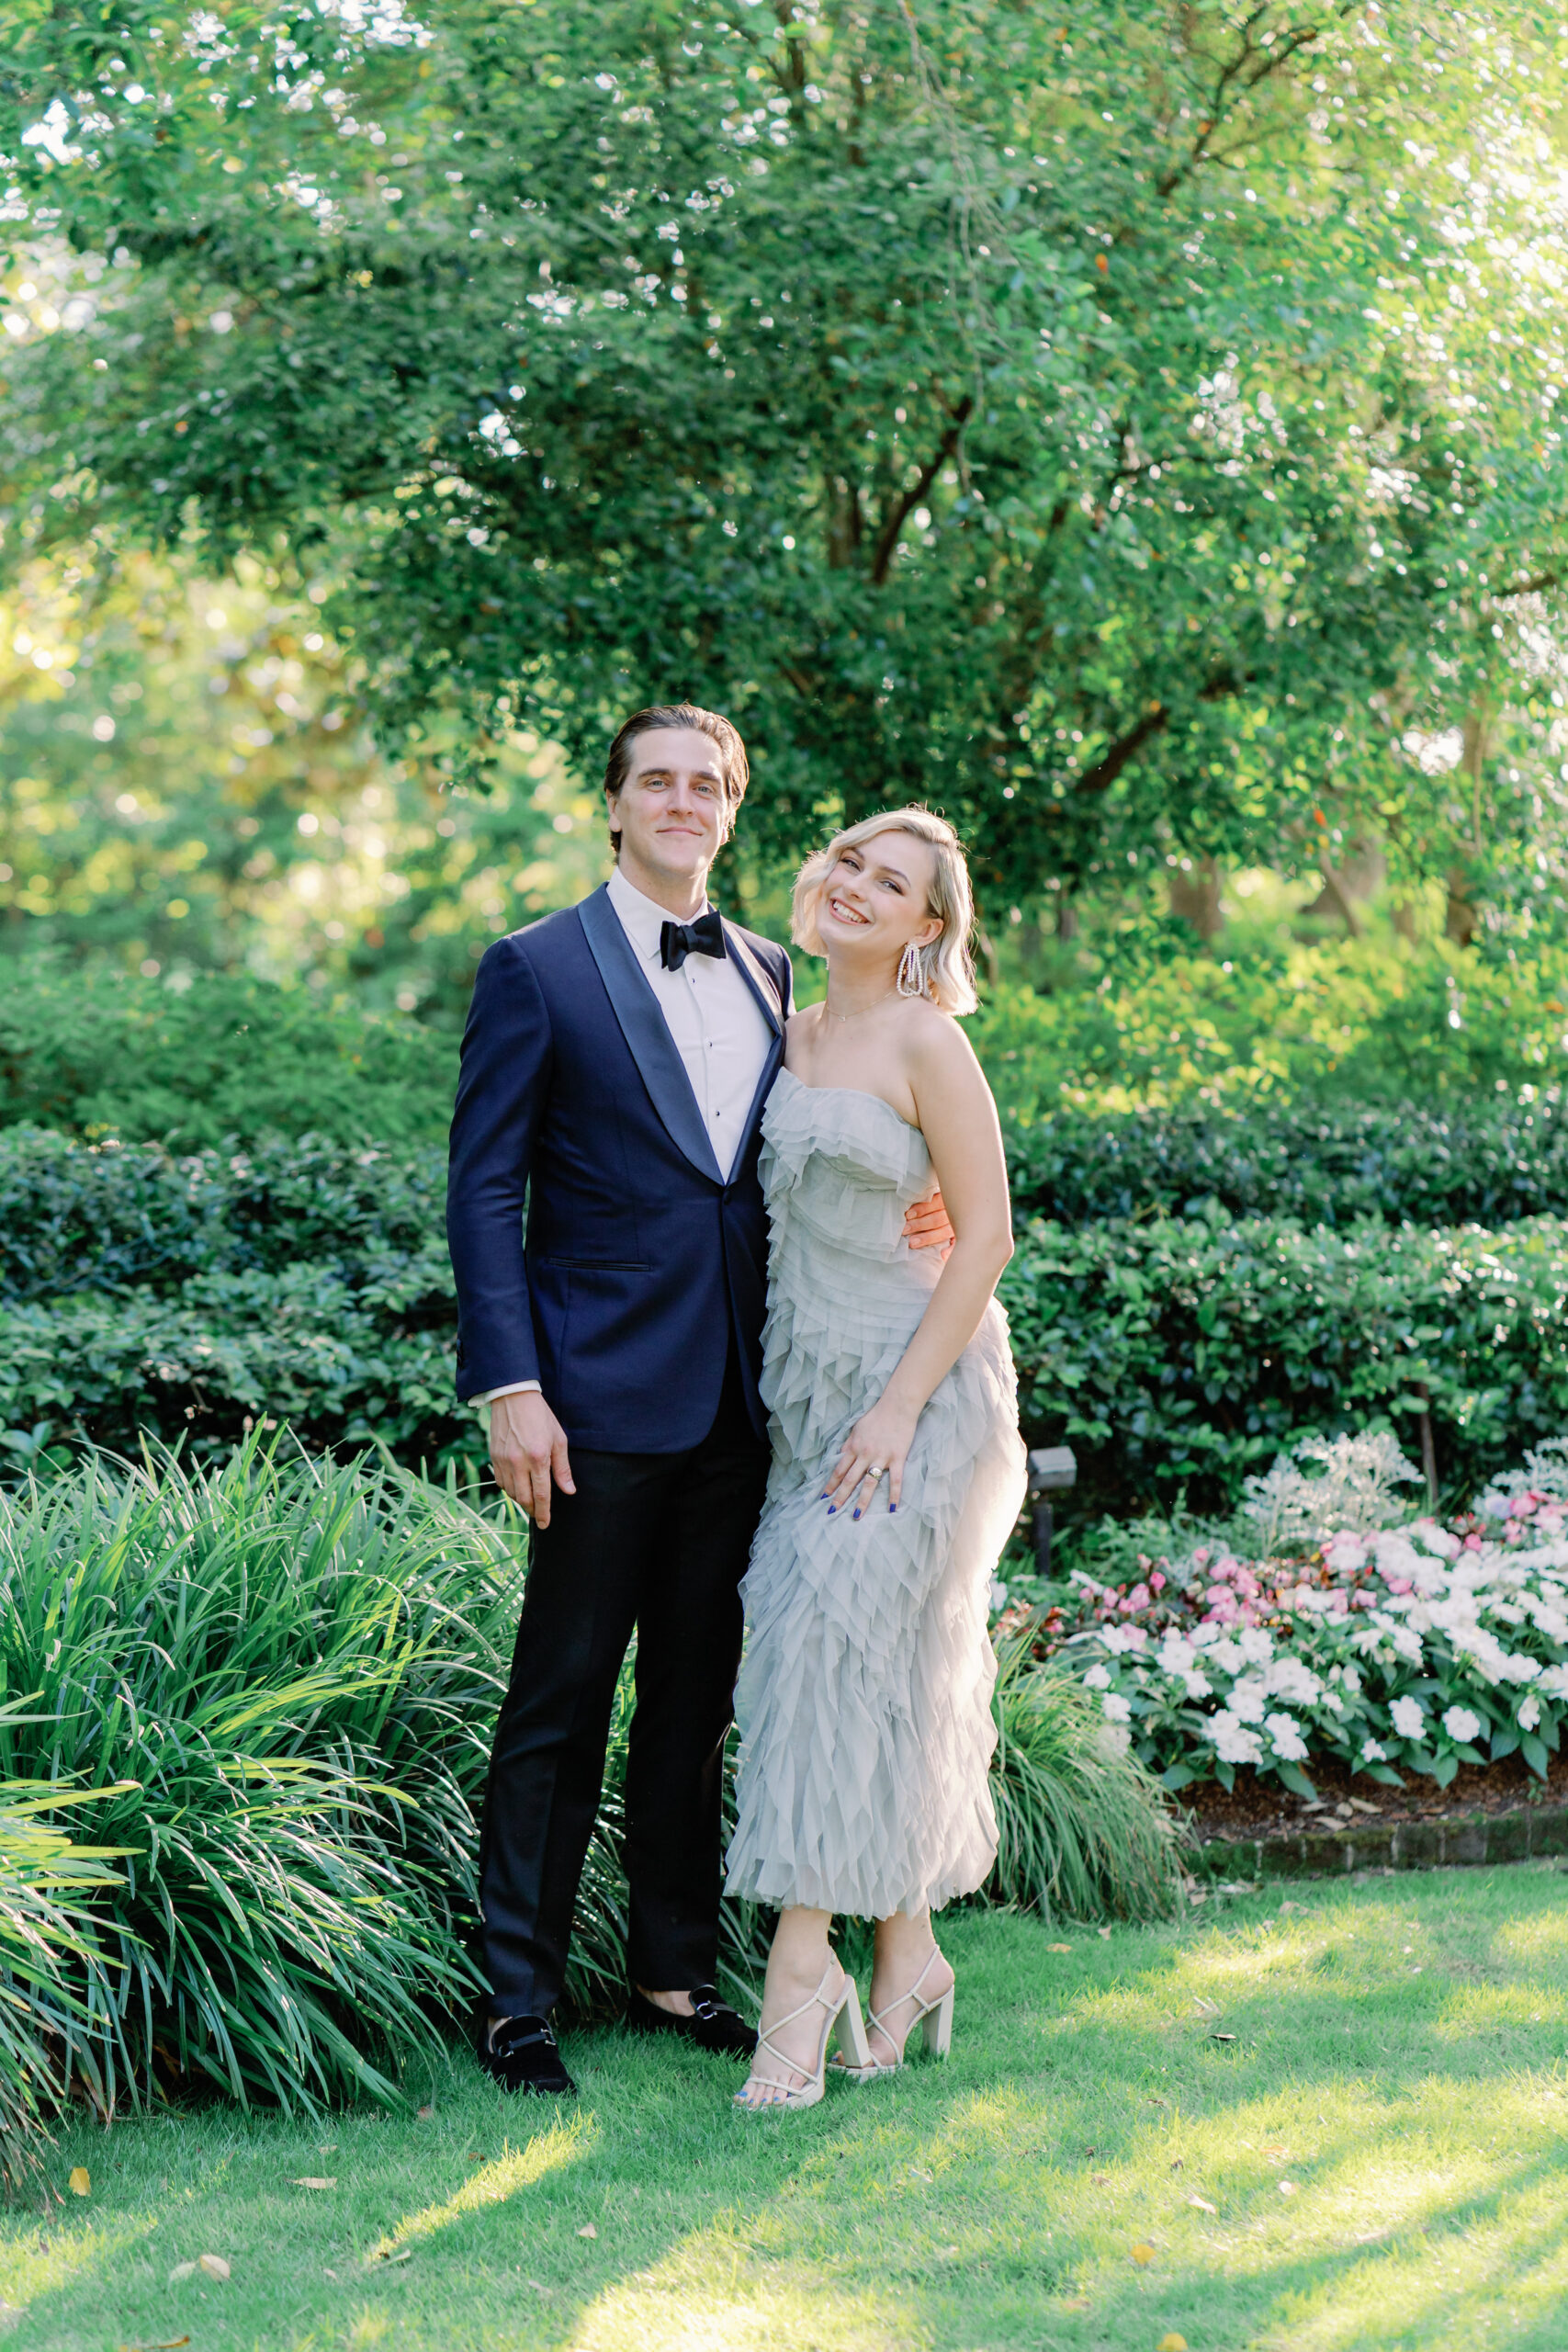 Charleston wedding guest outfits.